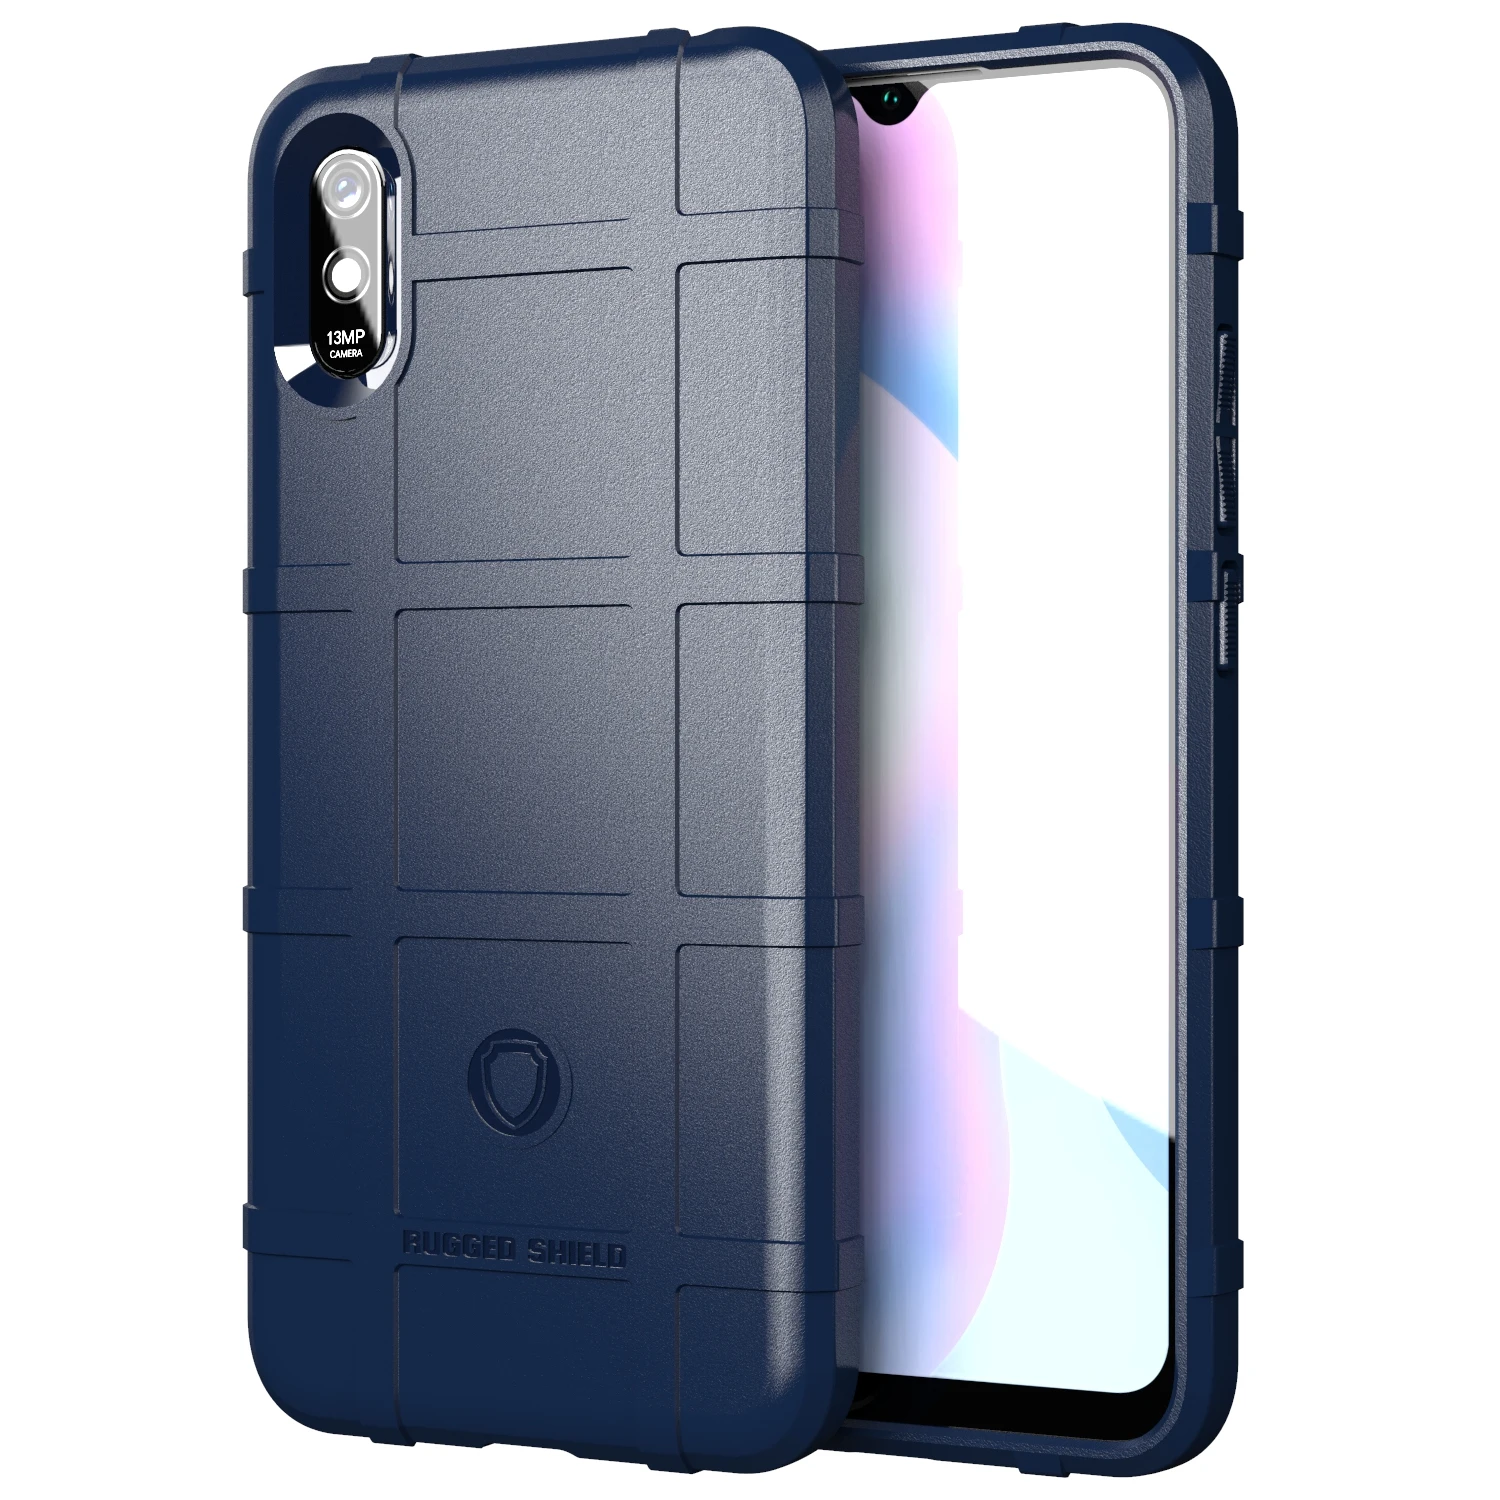 

Rugged Shockproof Shield Soft Rubber Armor Case Cover For XIAOMI RedMi 9A, As pictures